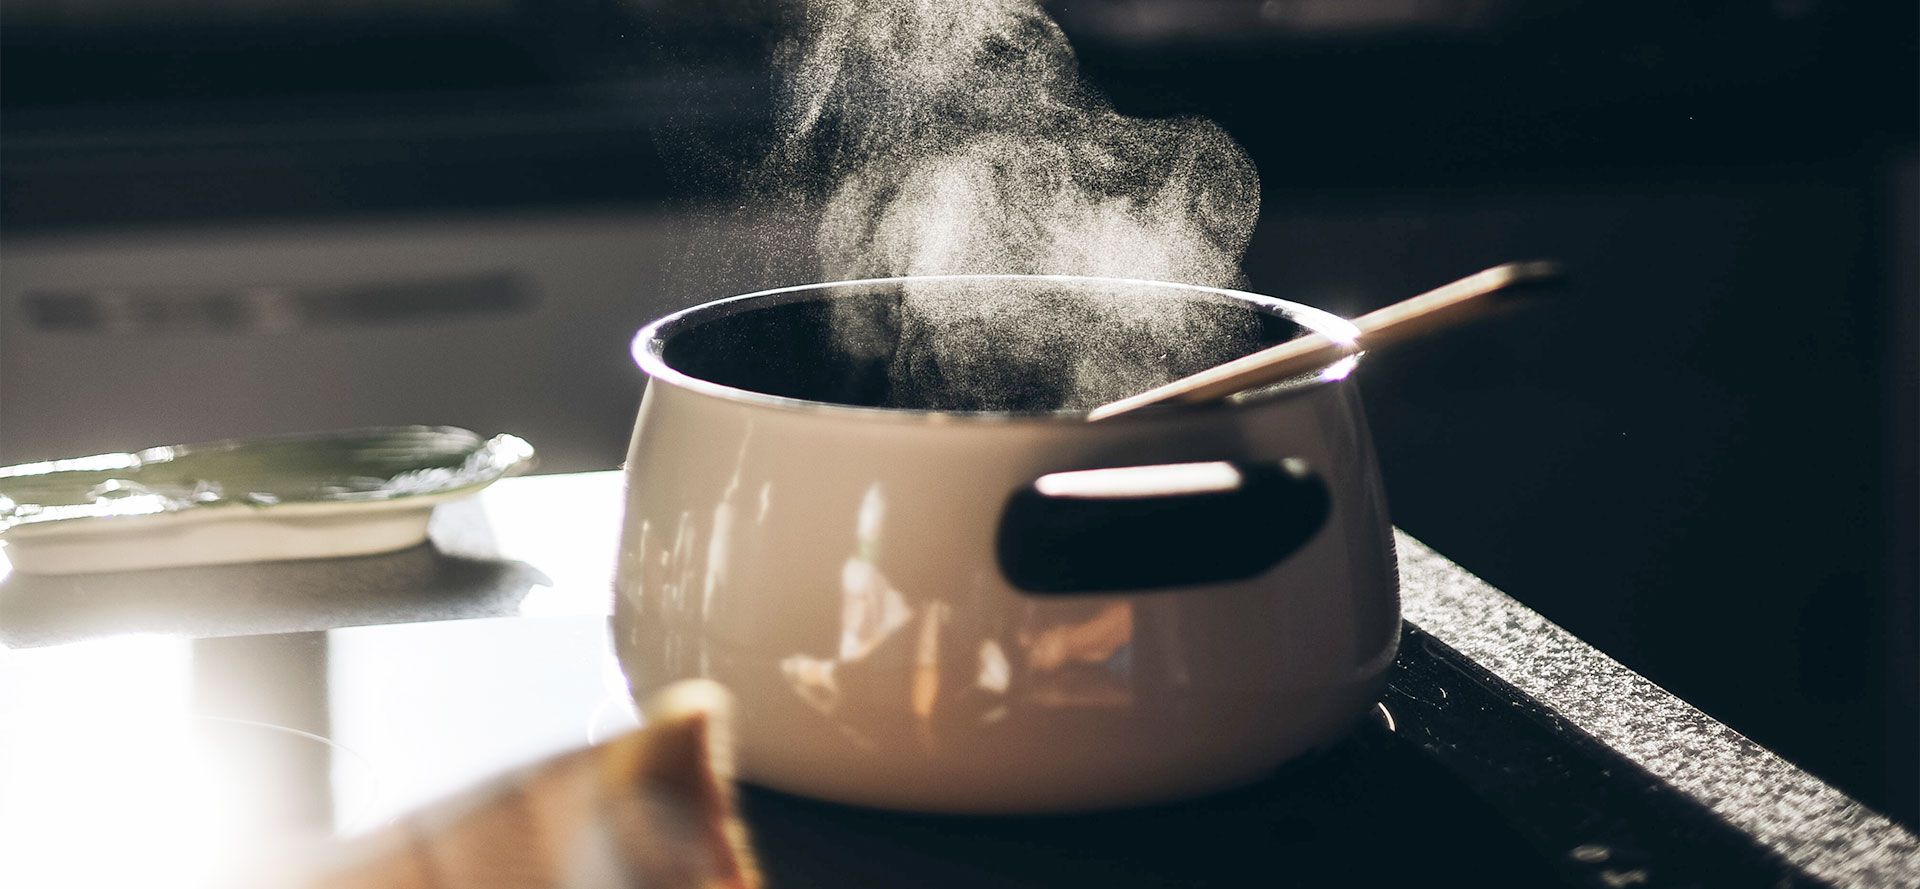 Coffee Is Brewed In A Saucepan On the Stove.